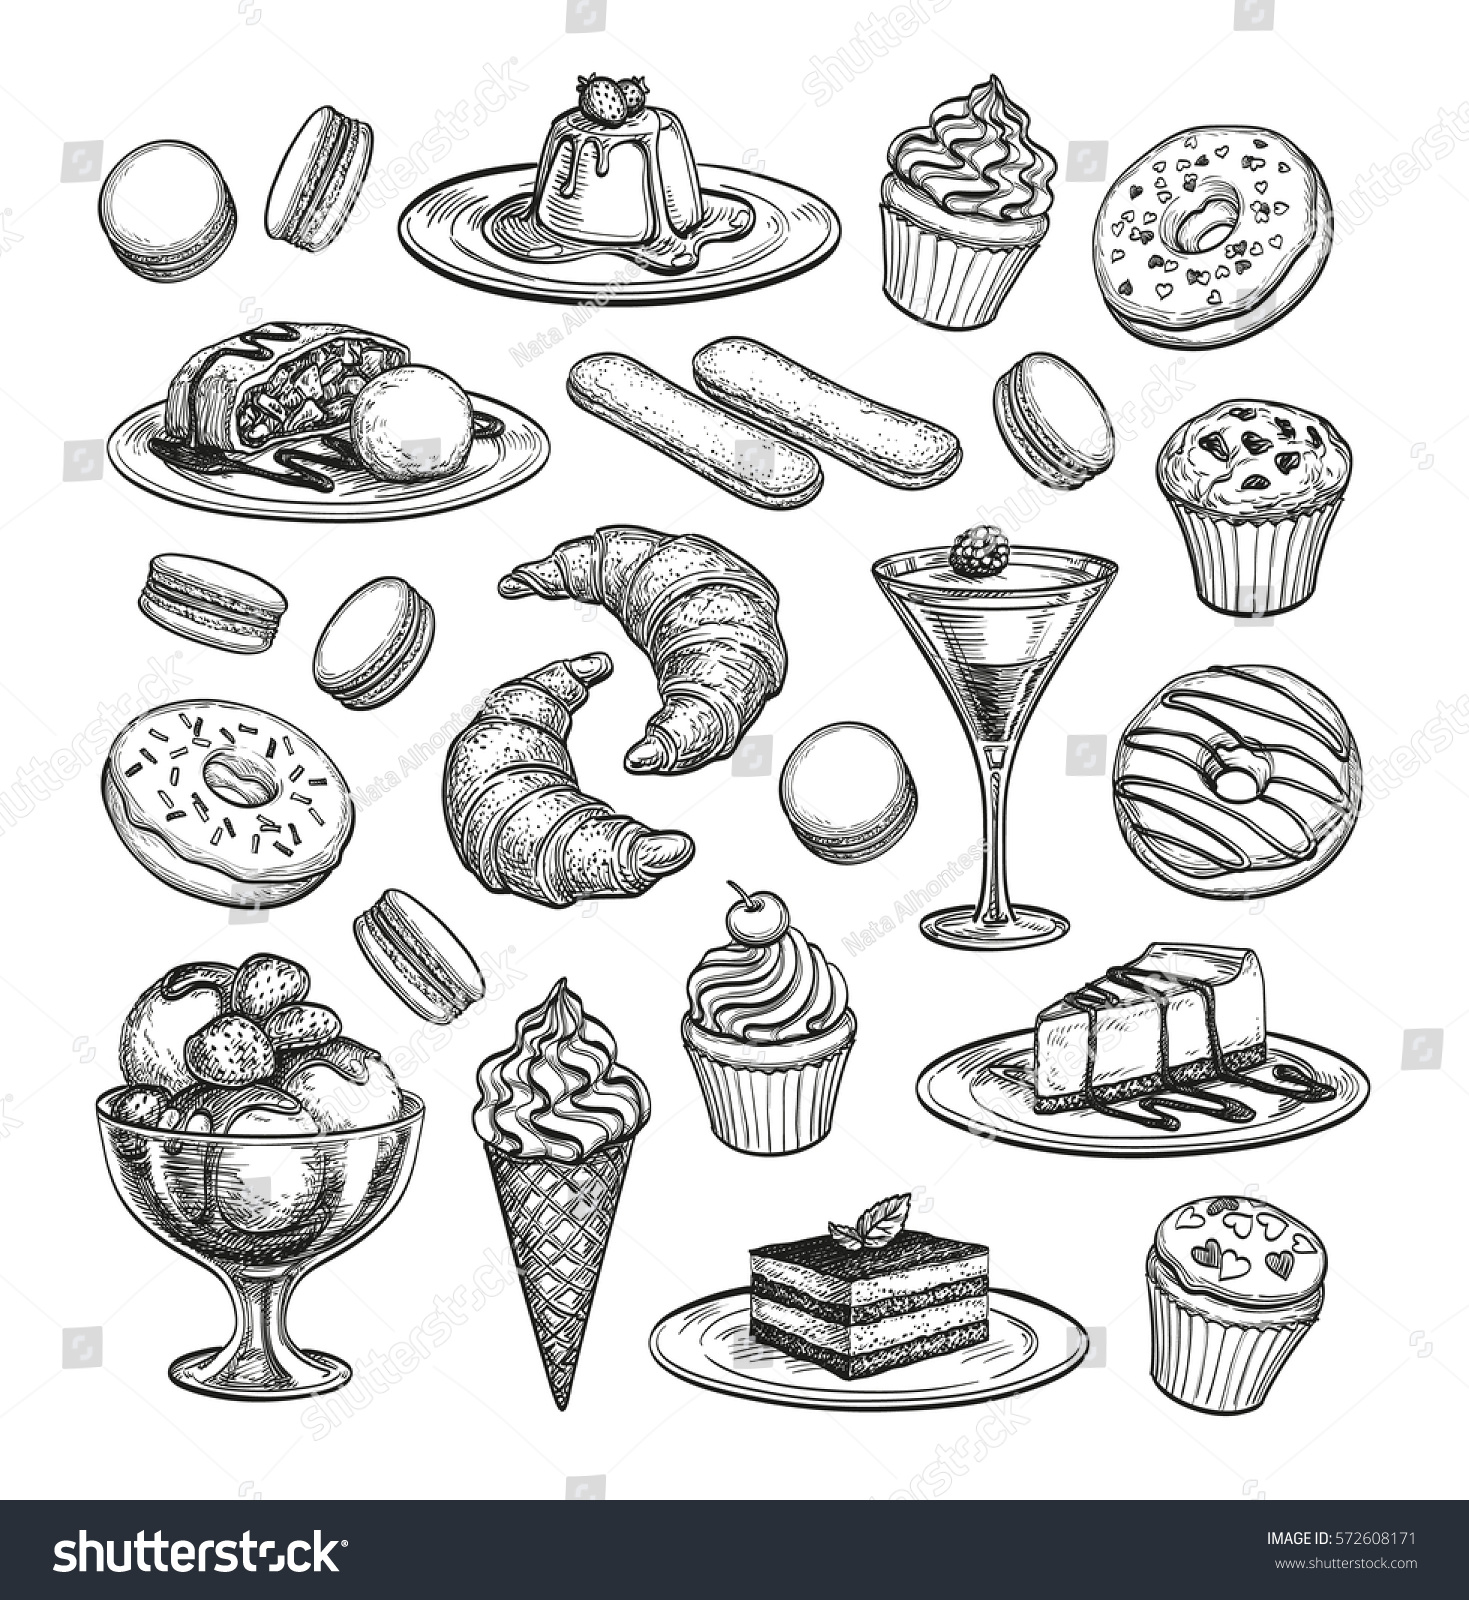 Sketch set of dessert. Pastry sweets collection isolated on white background. Hand drawn vector illustration. Retro style. #572608171